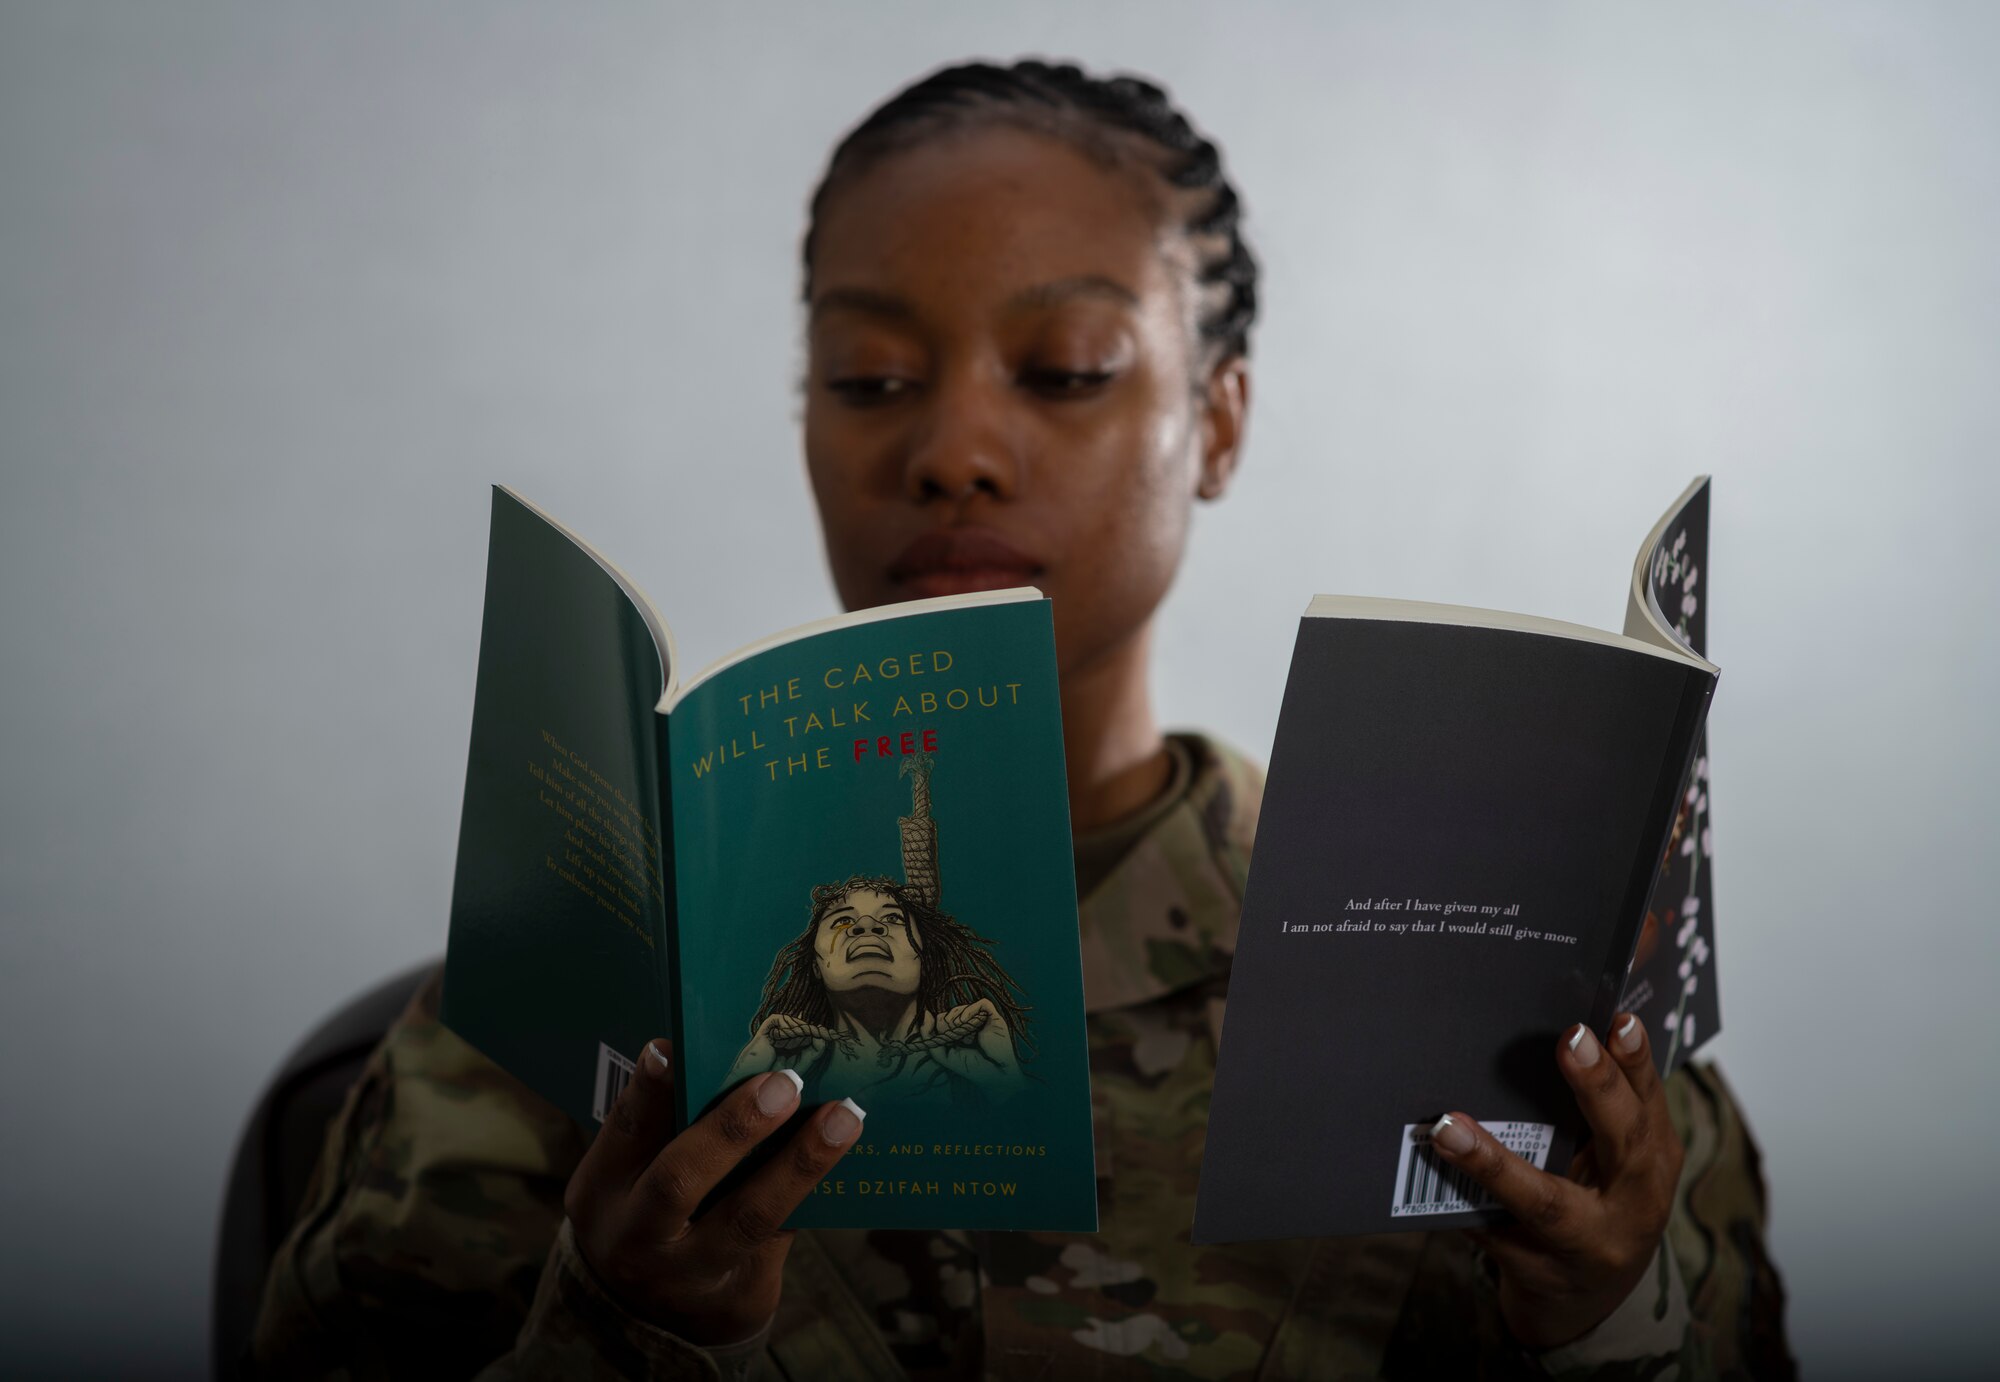 Airman poses for a photo holding books.